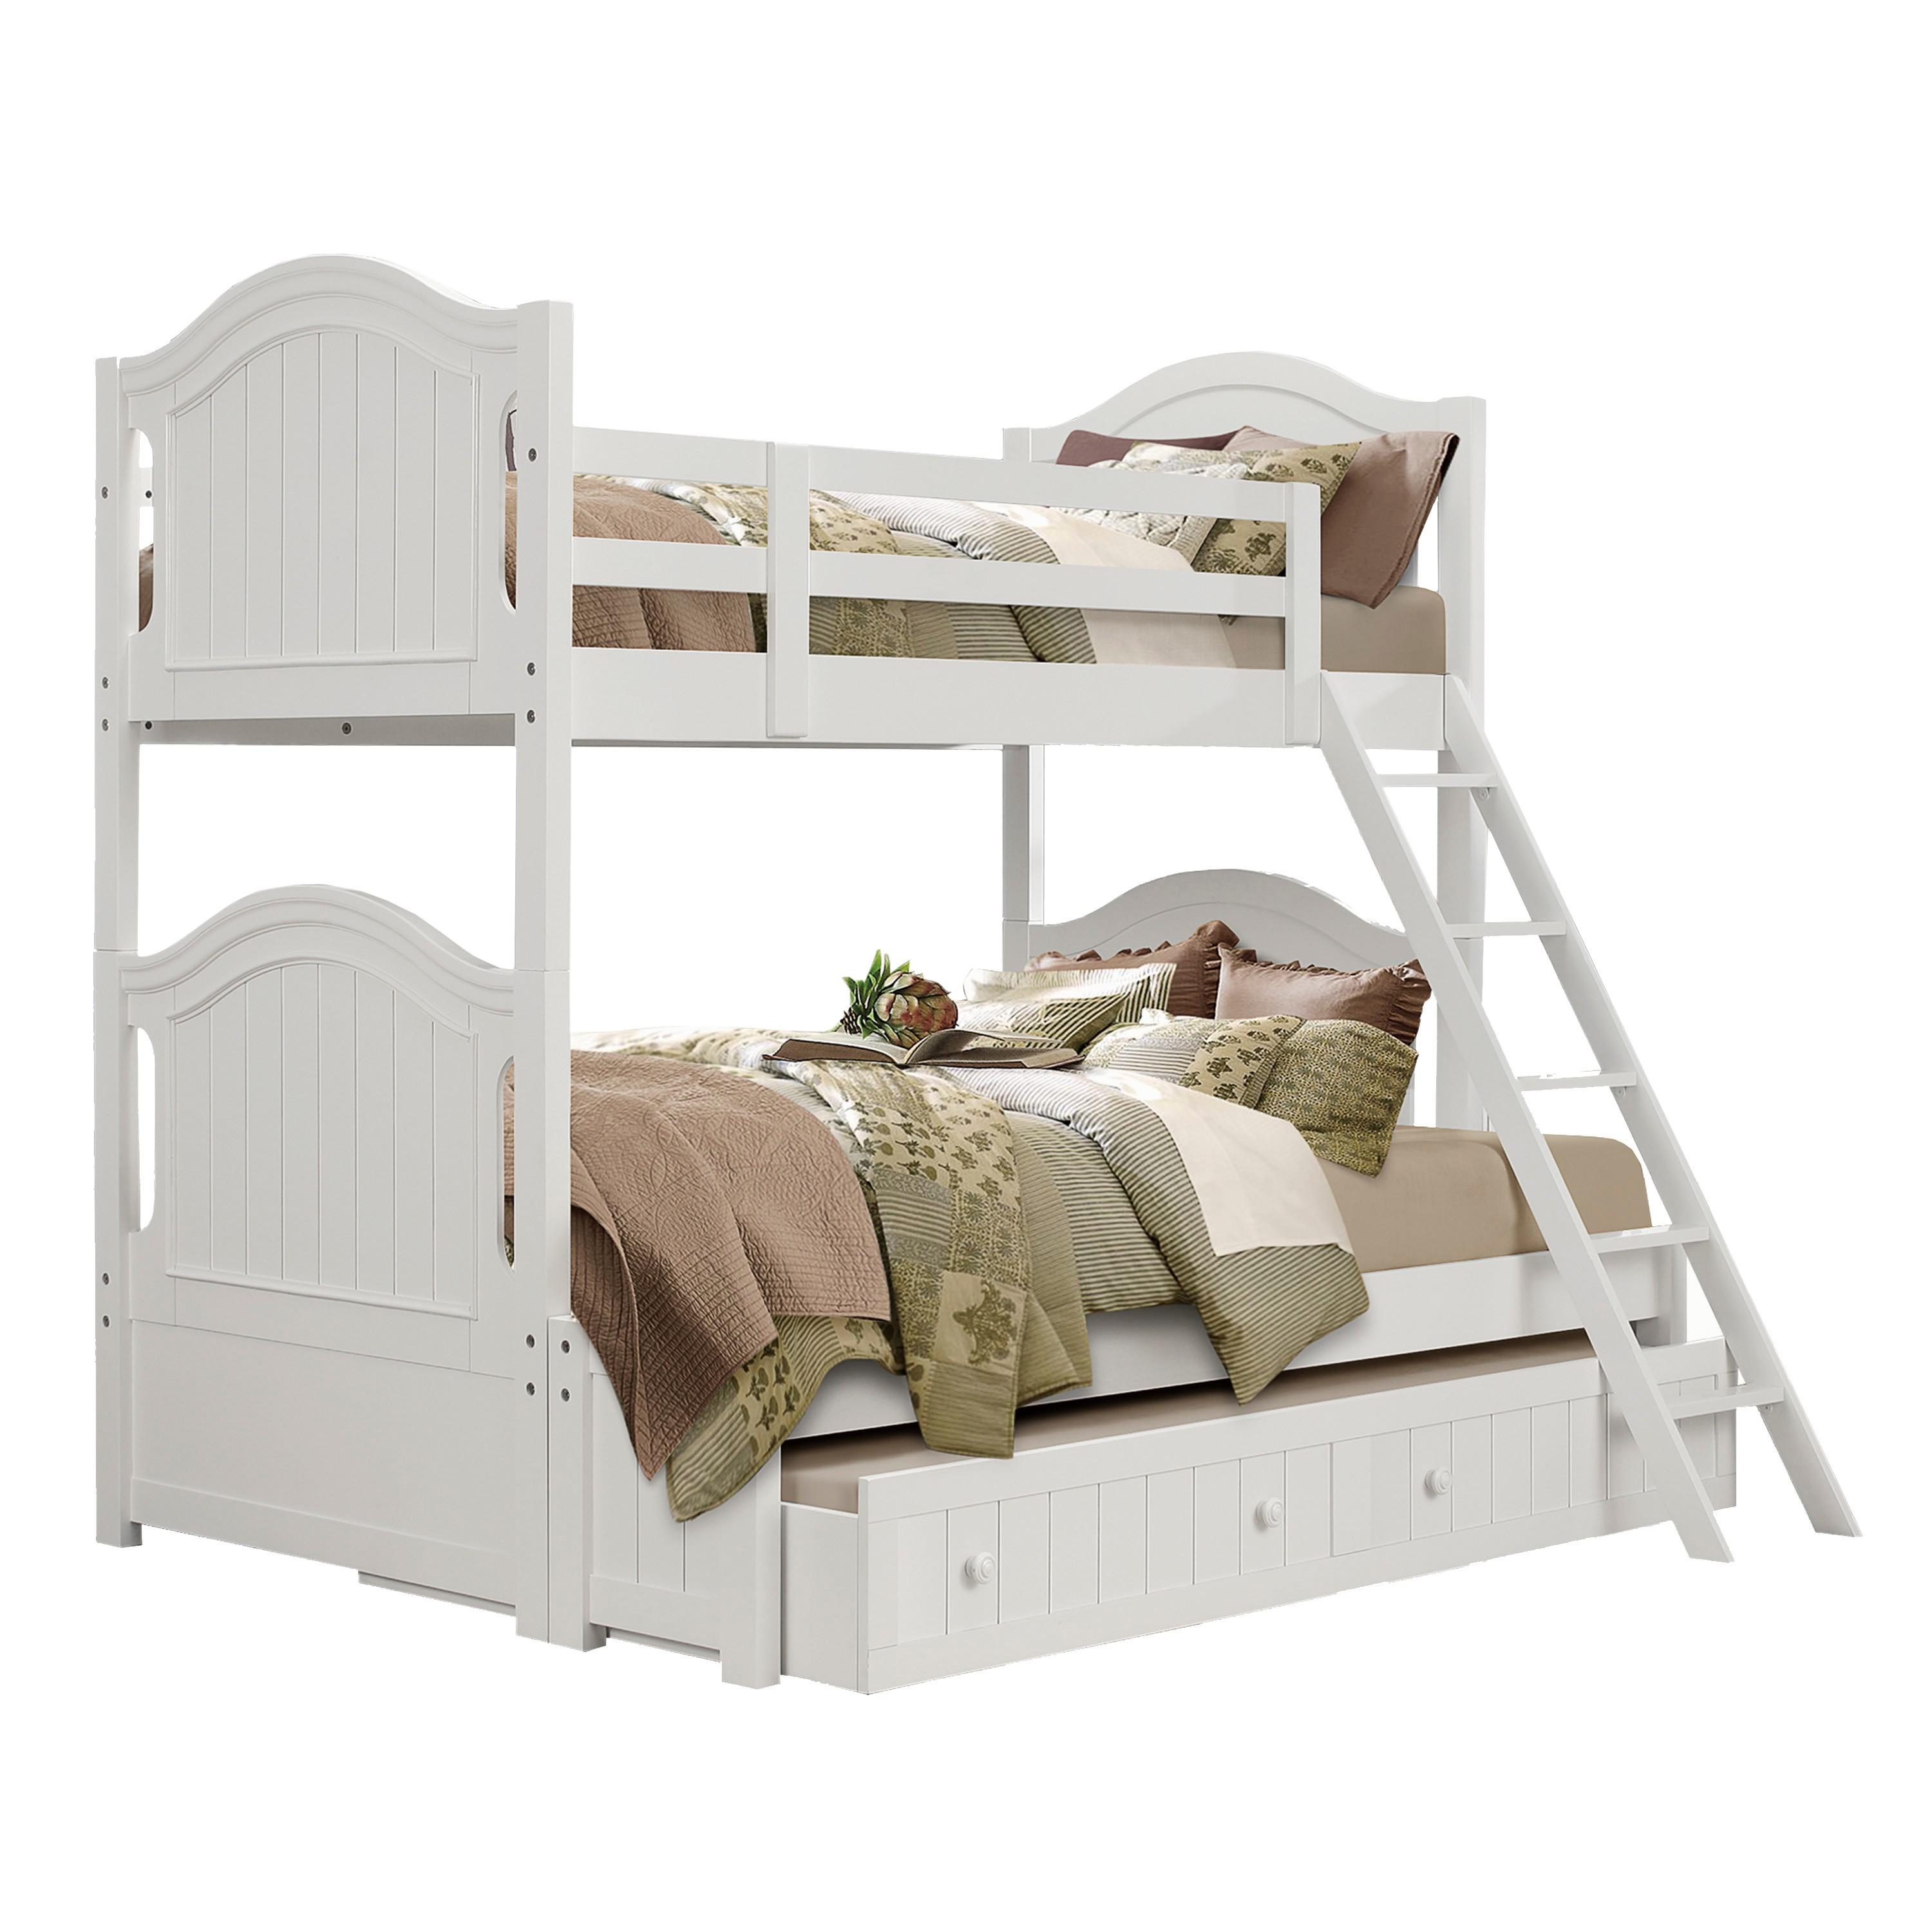 Homelegance B1799-1F*R Clementine Bunk Bed